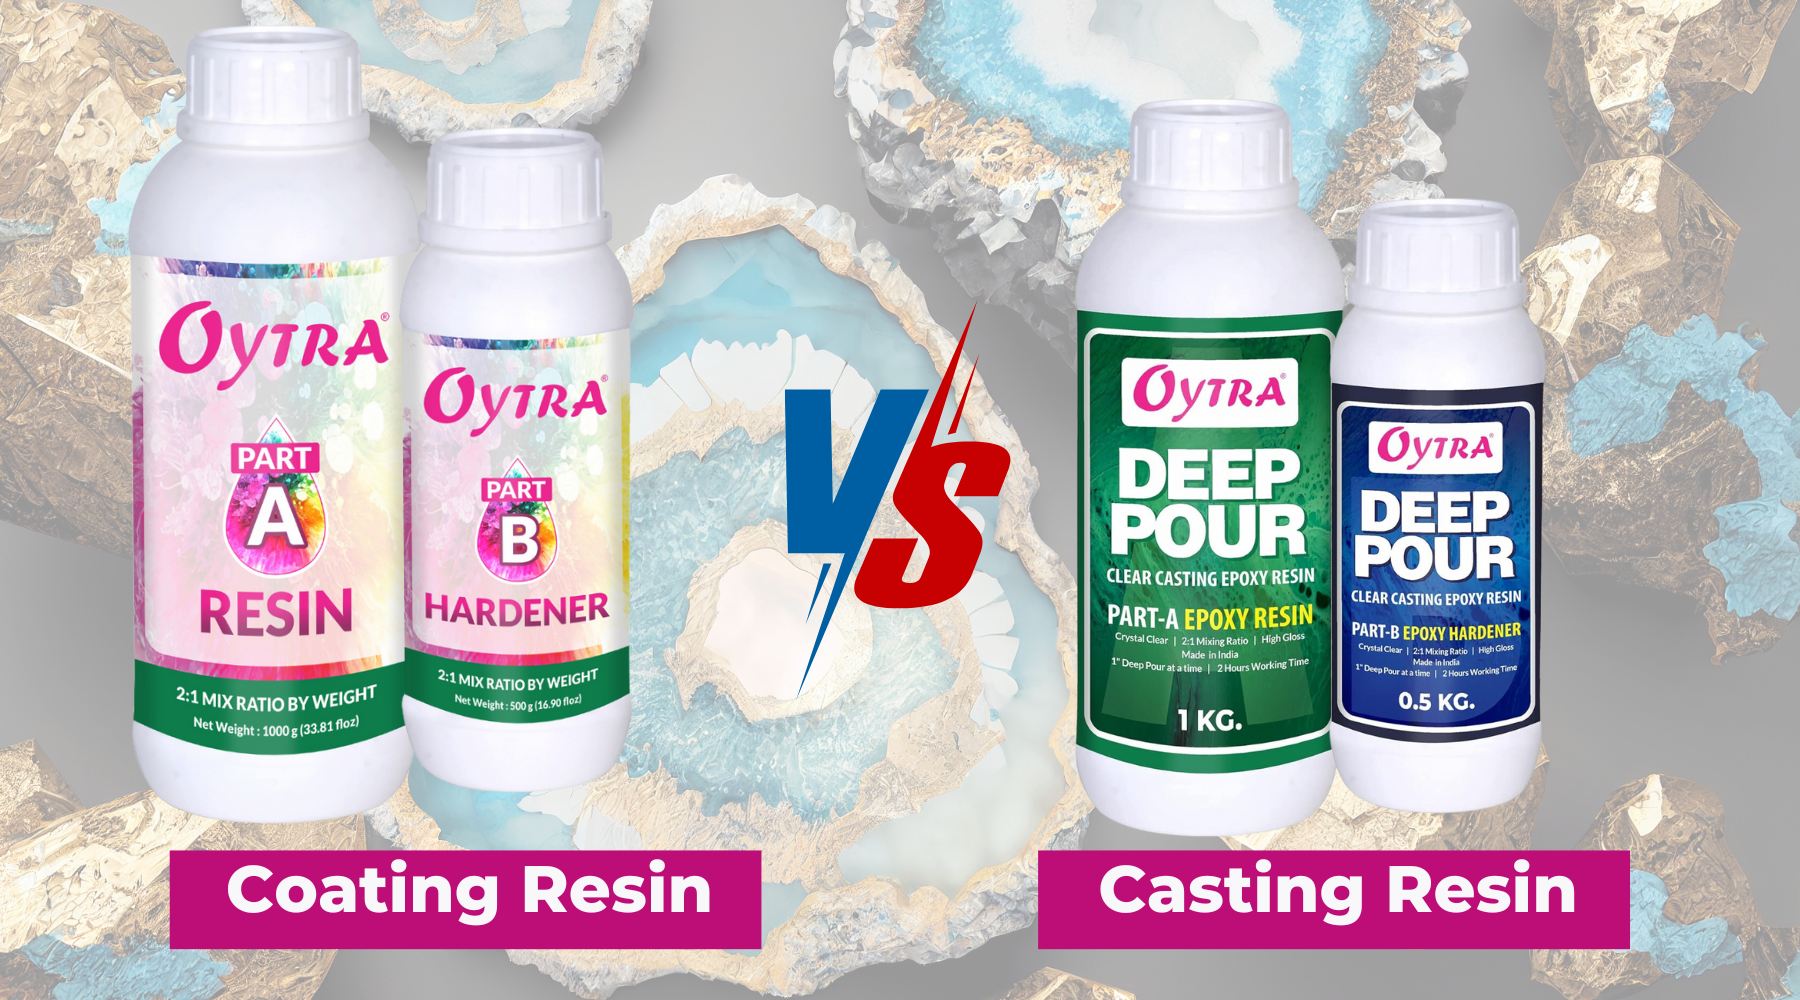 Oytra Art Coating Resin vs. Oytra Deep Pour Casting Resin